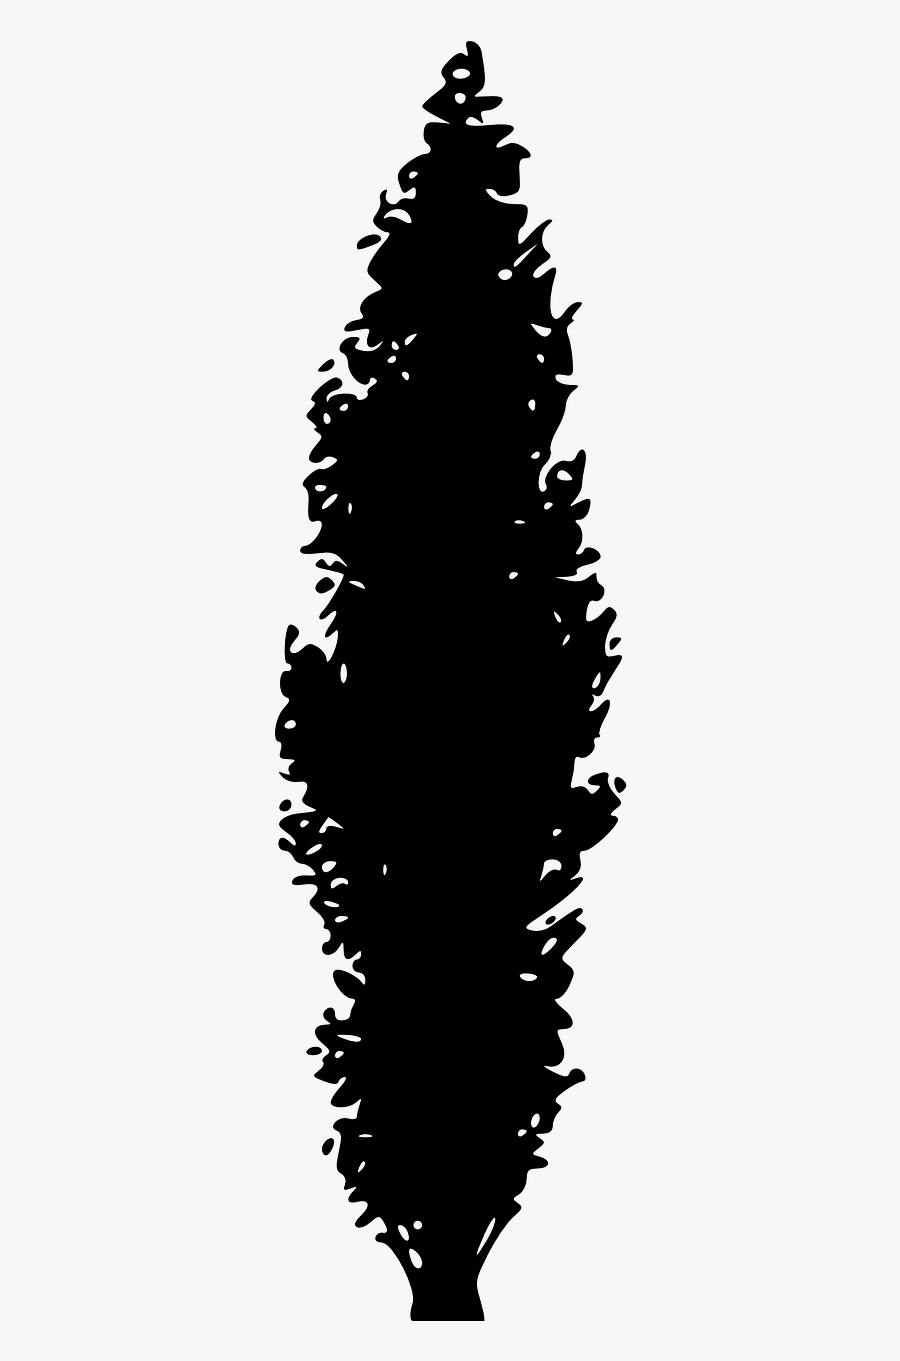 Transparent Forest Png - Pine Tree Silhouette, Transparent Clipart